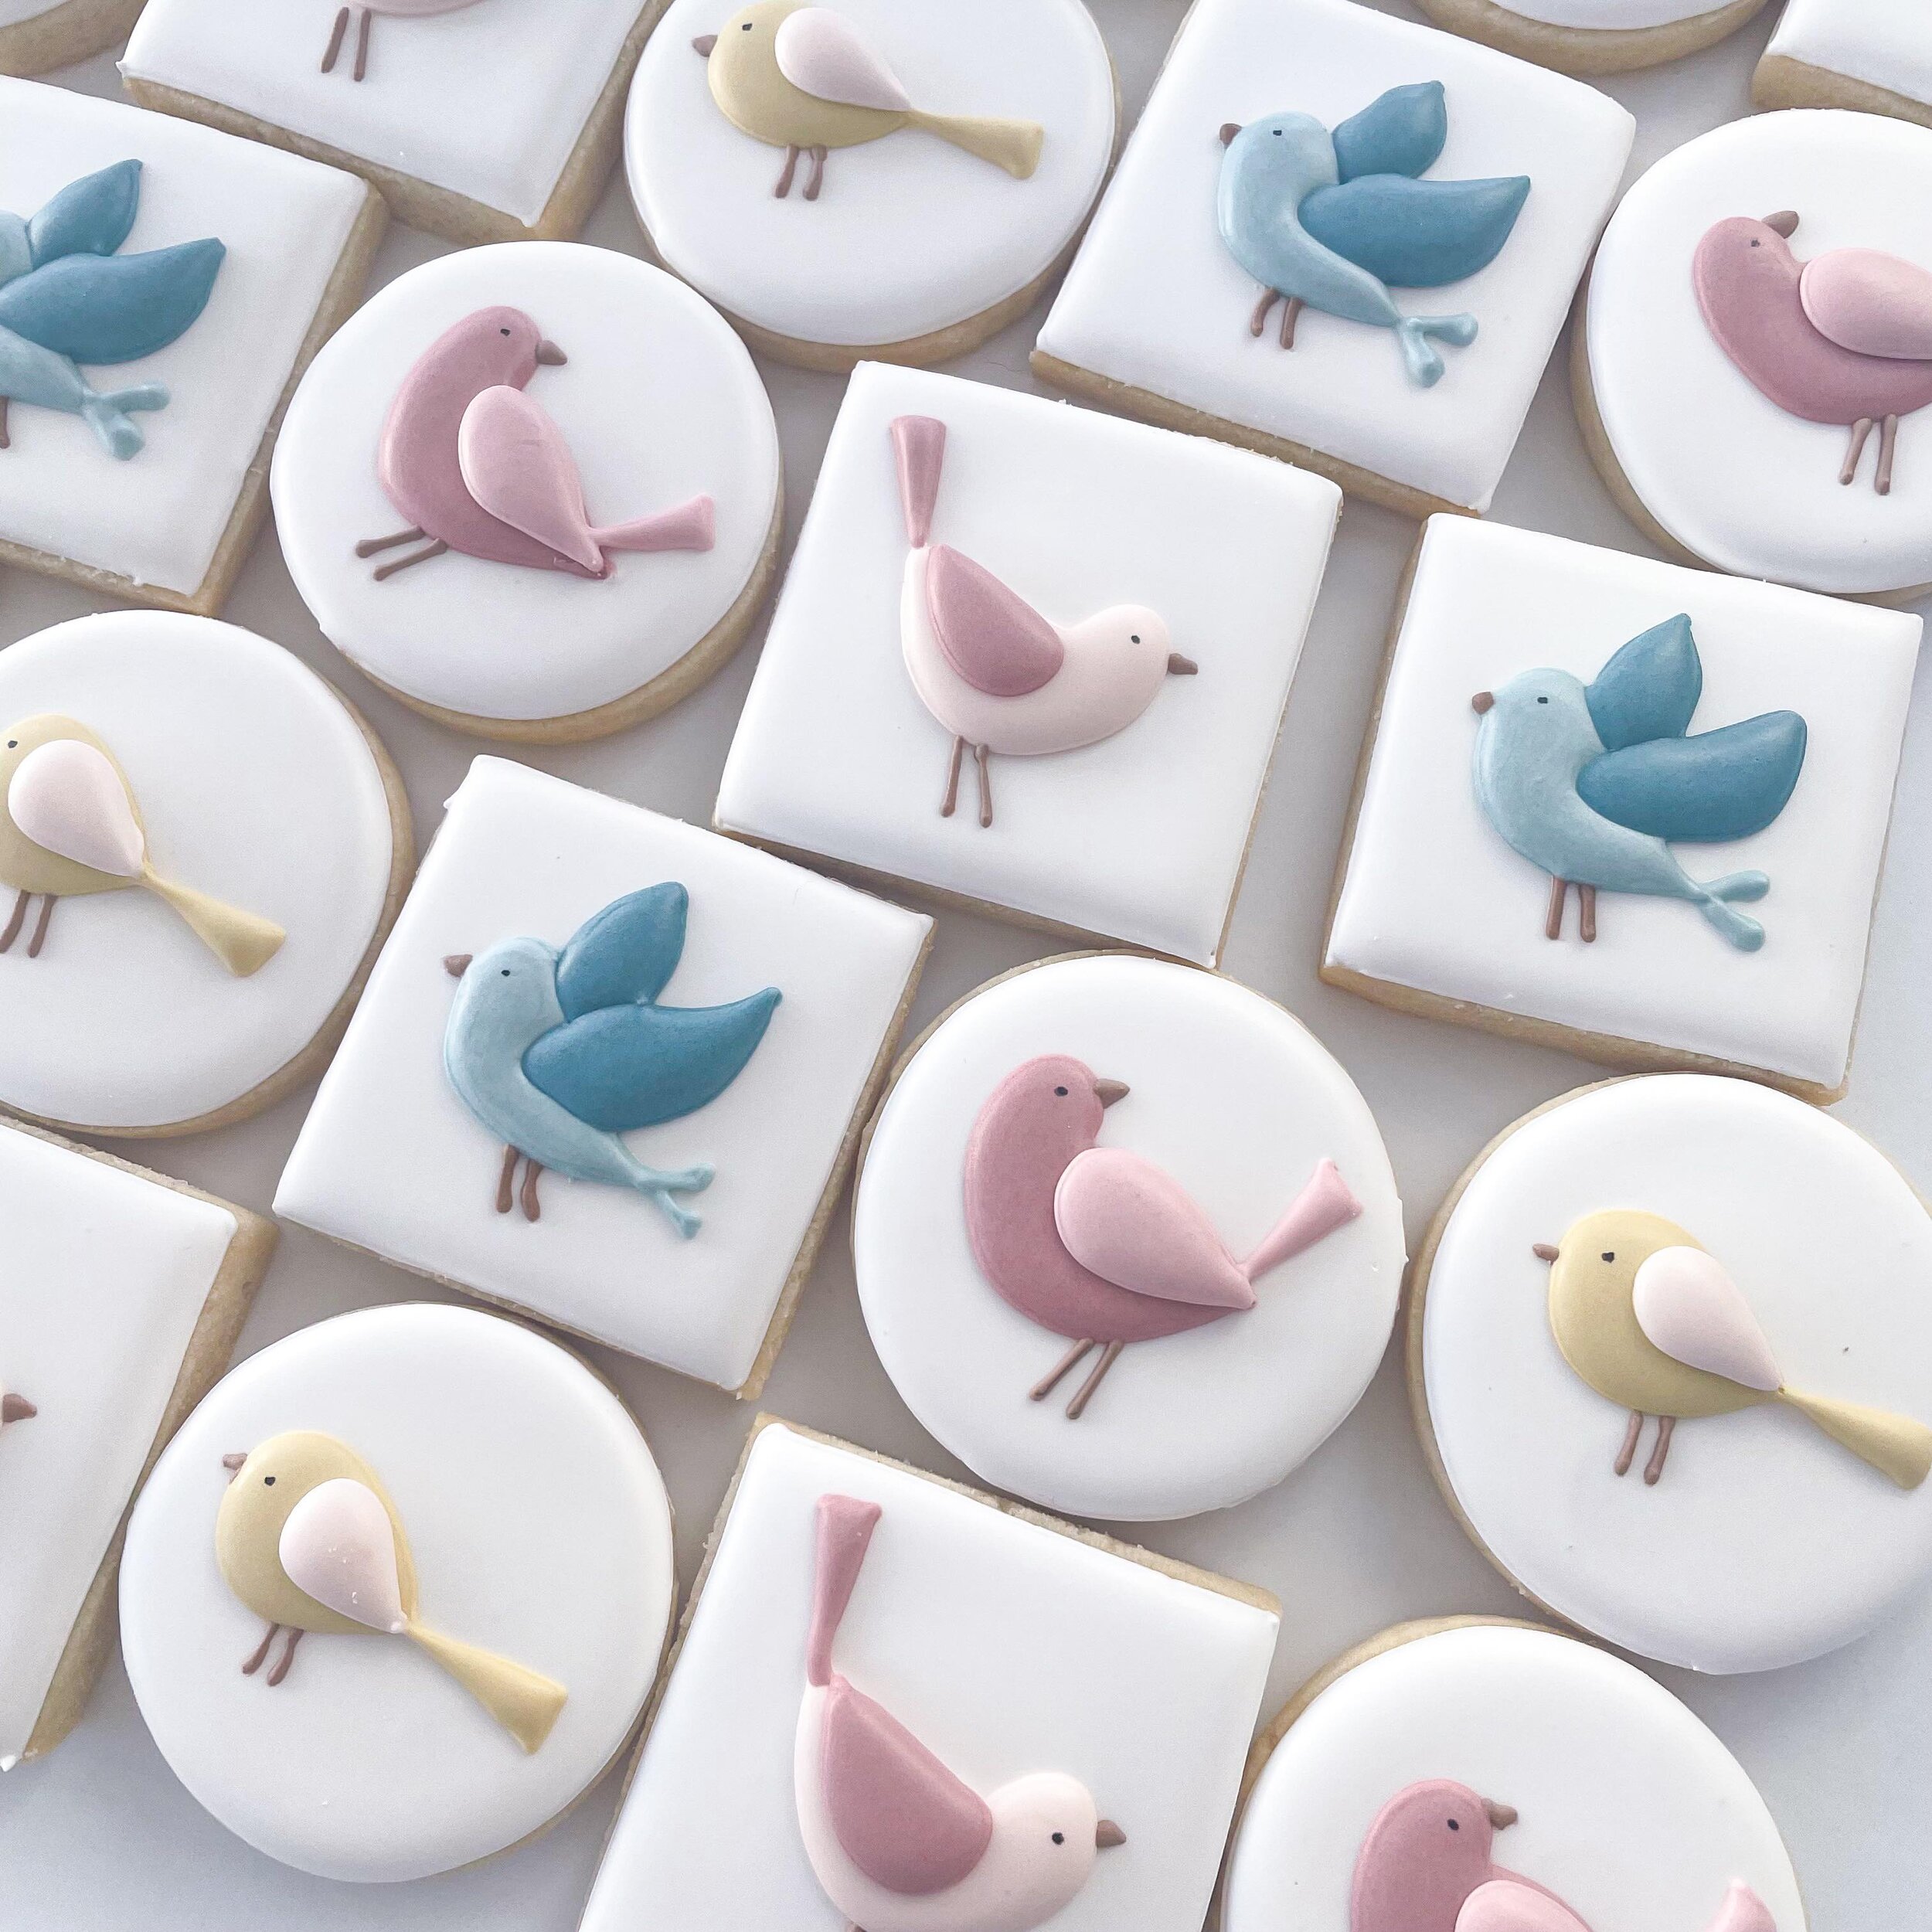 Snag a cute birdie cookie and enjoy the beautifully curated collection at @clothandhomeshop &lsquo;s Opening Night party from 4:00-7:00 today!